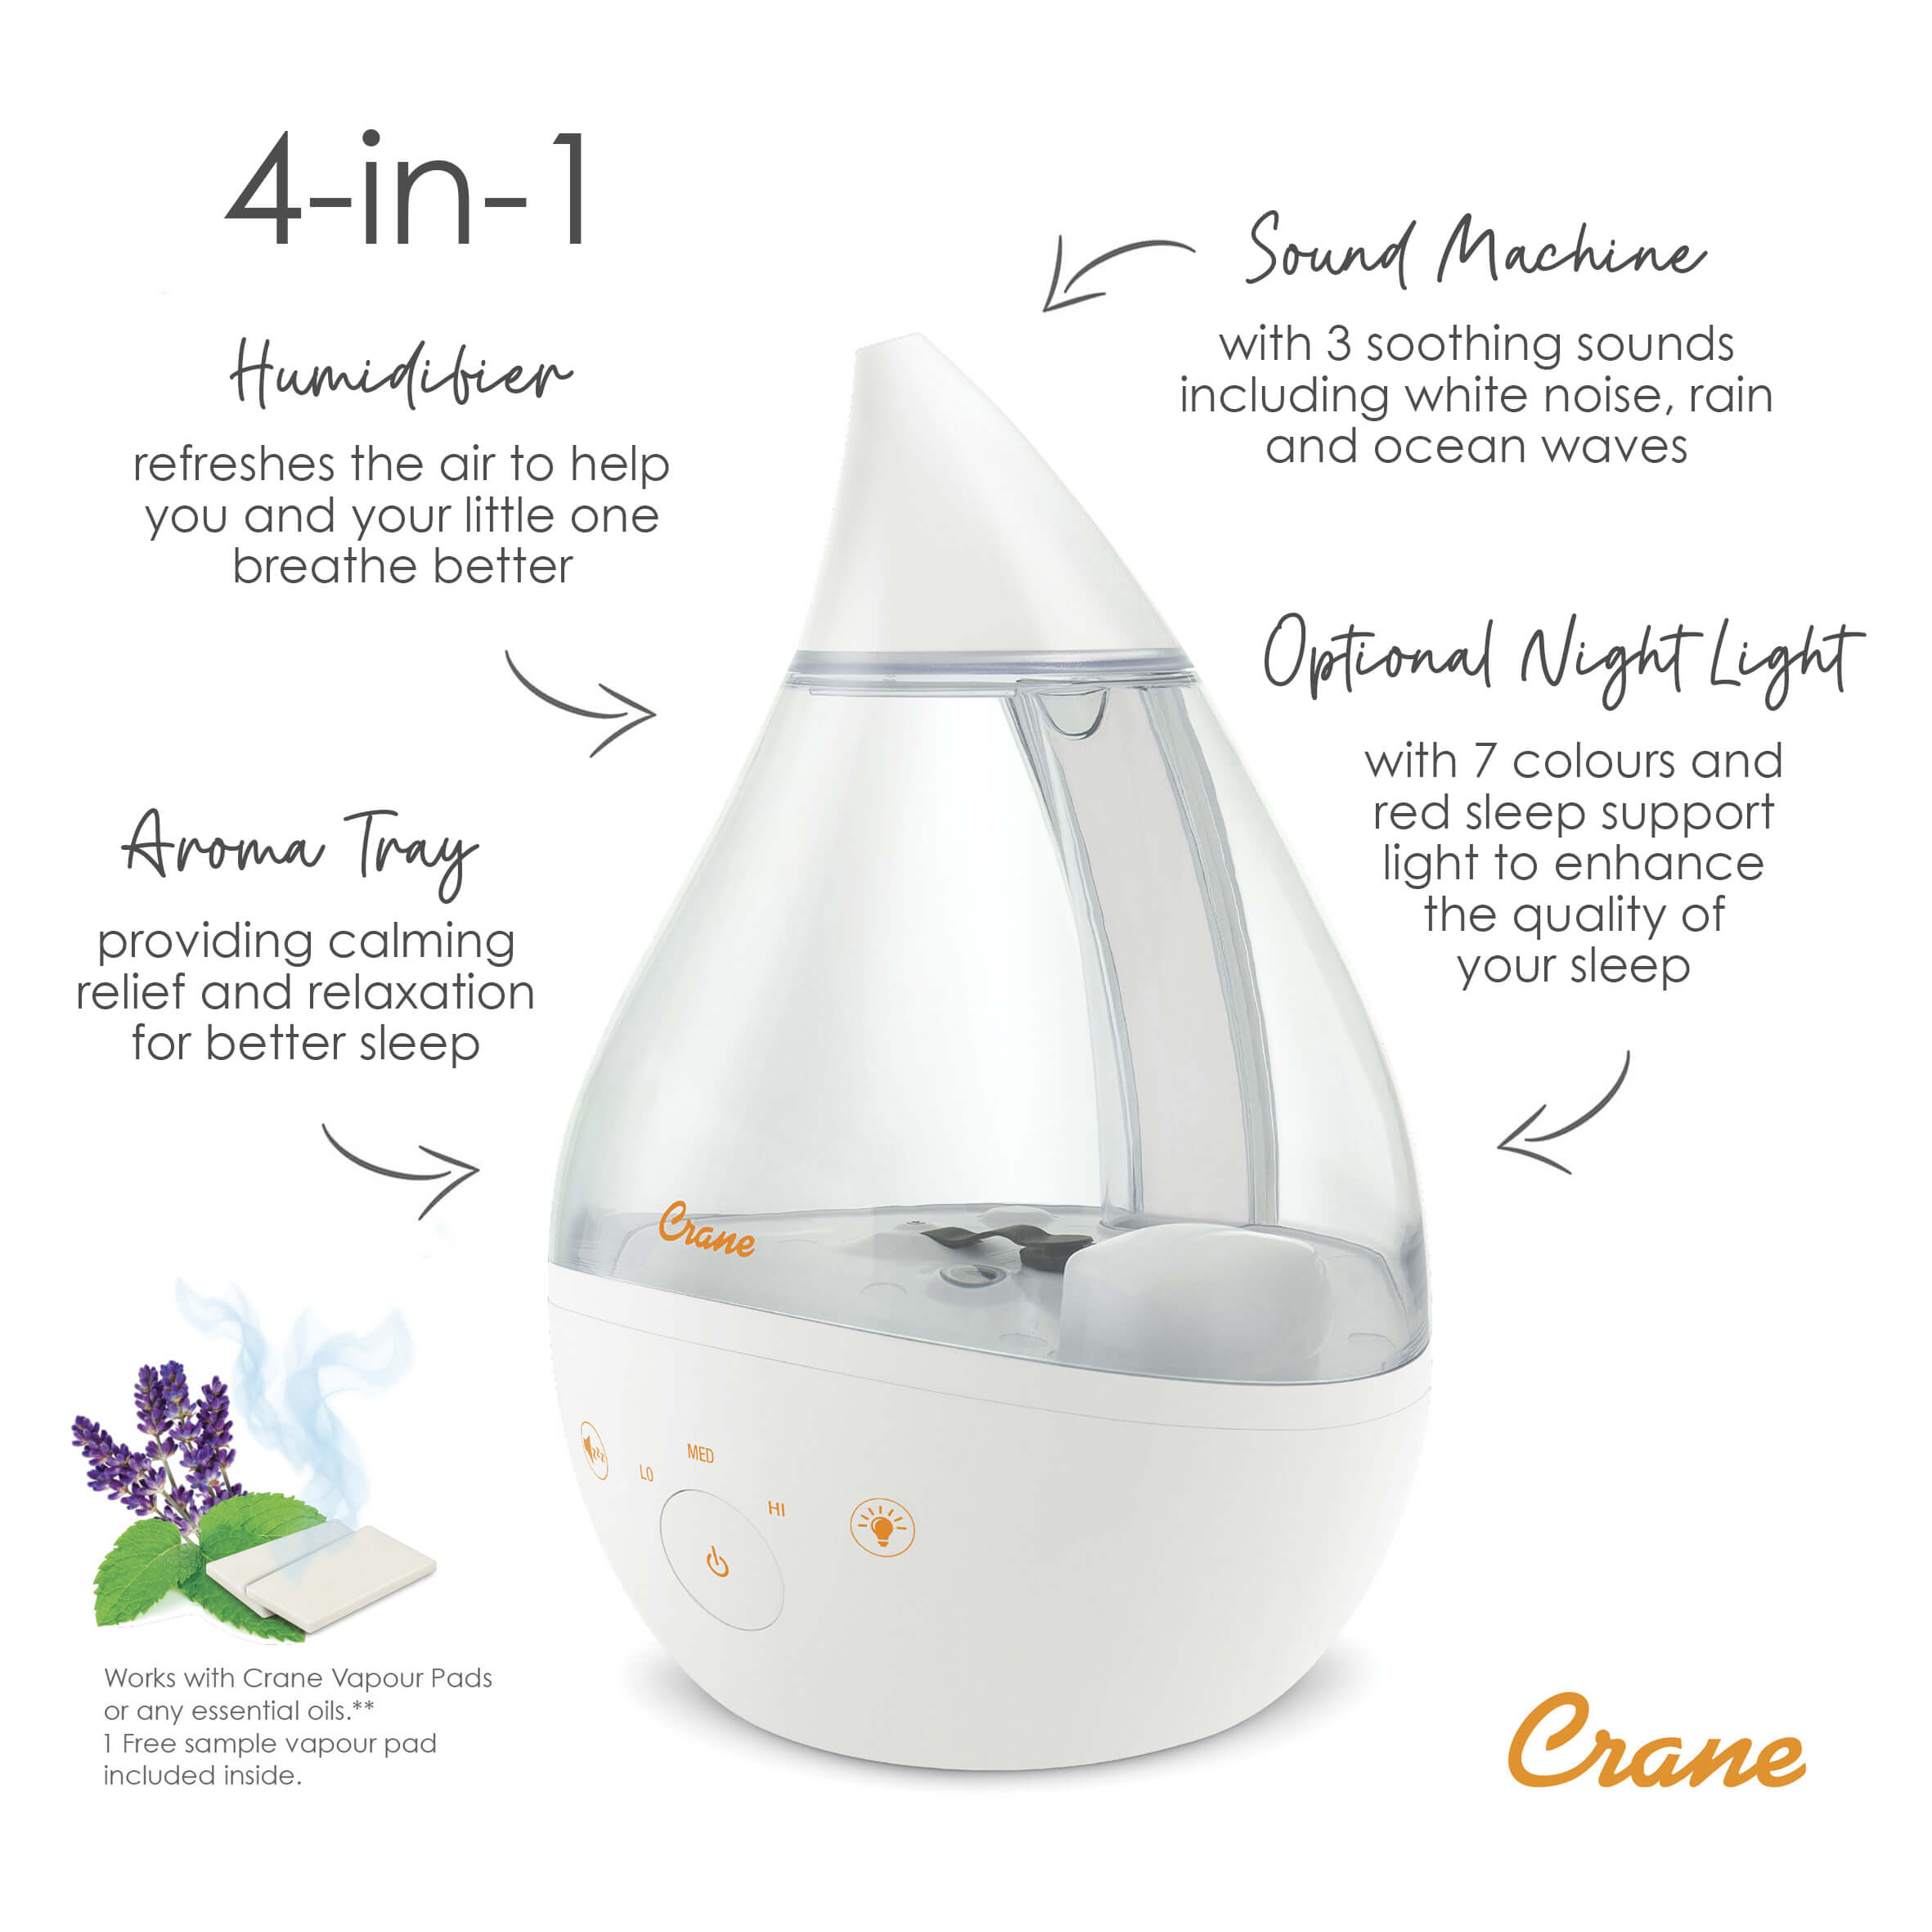 Exploded text image showing the 4-in-1 features of the Crane Humidifier. Including a humidifier that refreshes the air to help you and your little one to breathe better, sound machine with 3 soothing sounds including white noise, rain and ocean waves, optional night light with 7 colours and red sleep support light to enhance the quality of sleep, and the aroma tray providing calming relief and relaxation for better sleep.